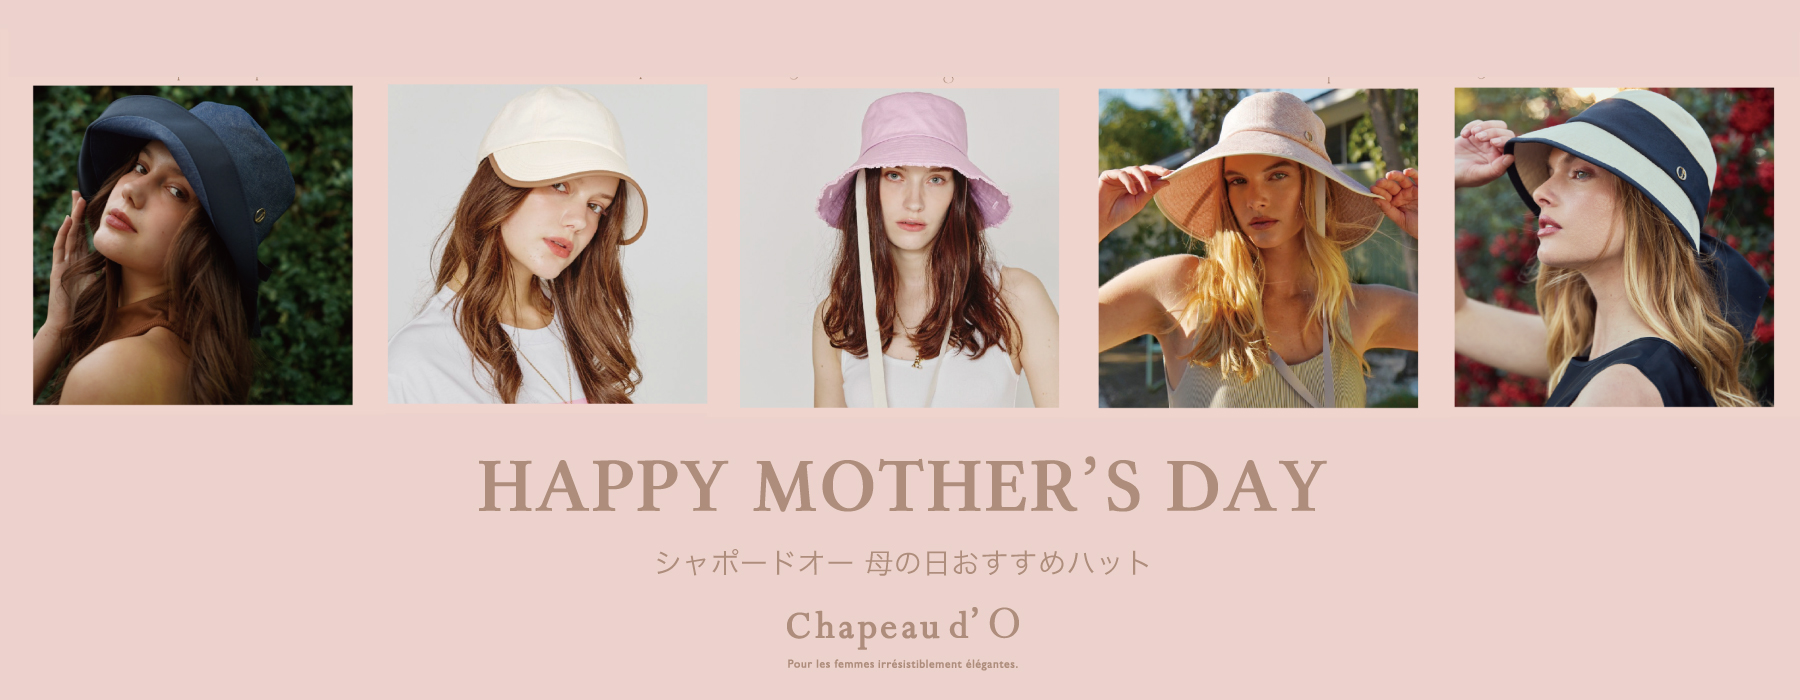 Chapeau d' O
HAPPY MOTHERS DAY